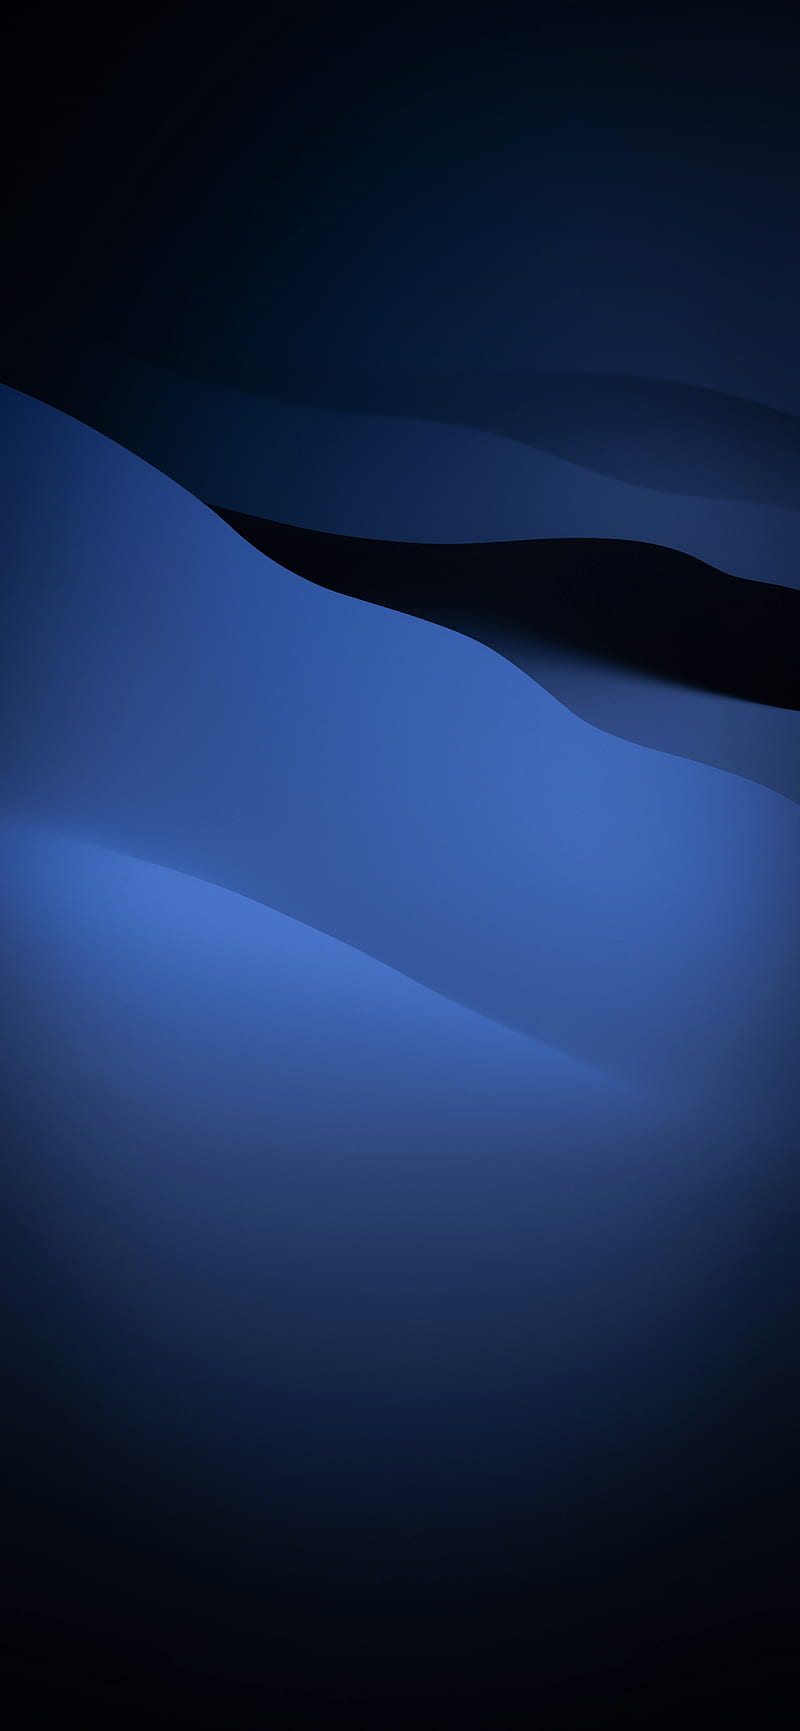 Share more than 83 black and blue wallpapers best - in.coedo.com.vn